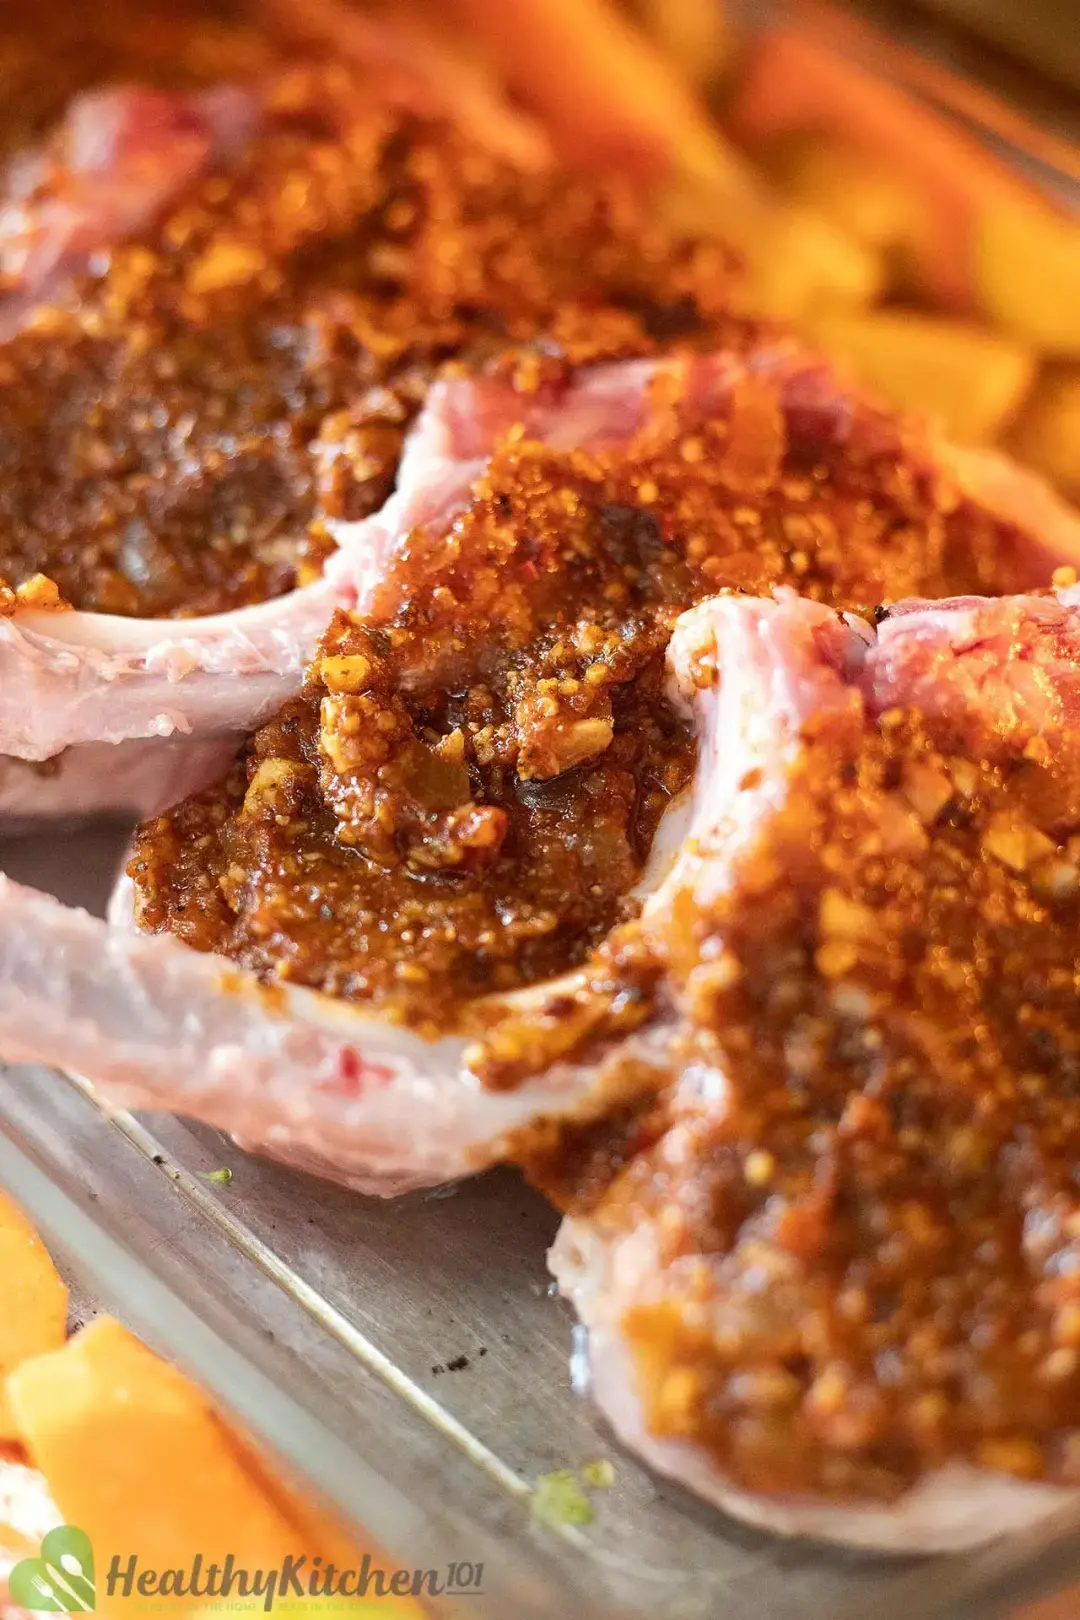 Raw pork chops covered in sauce